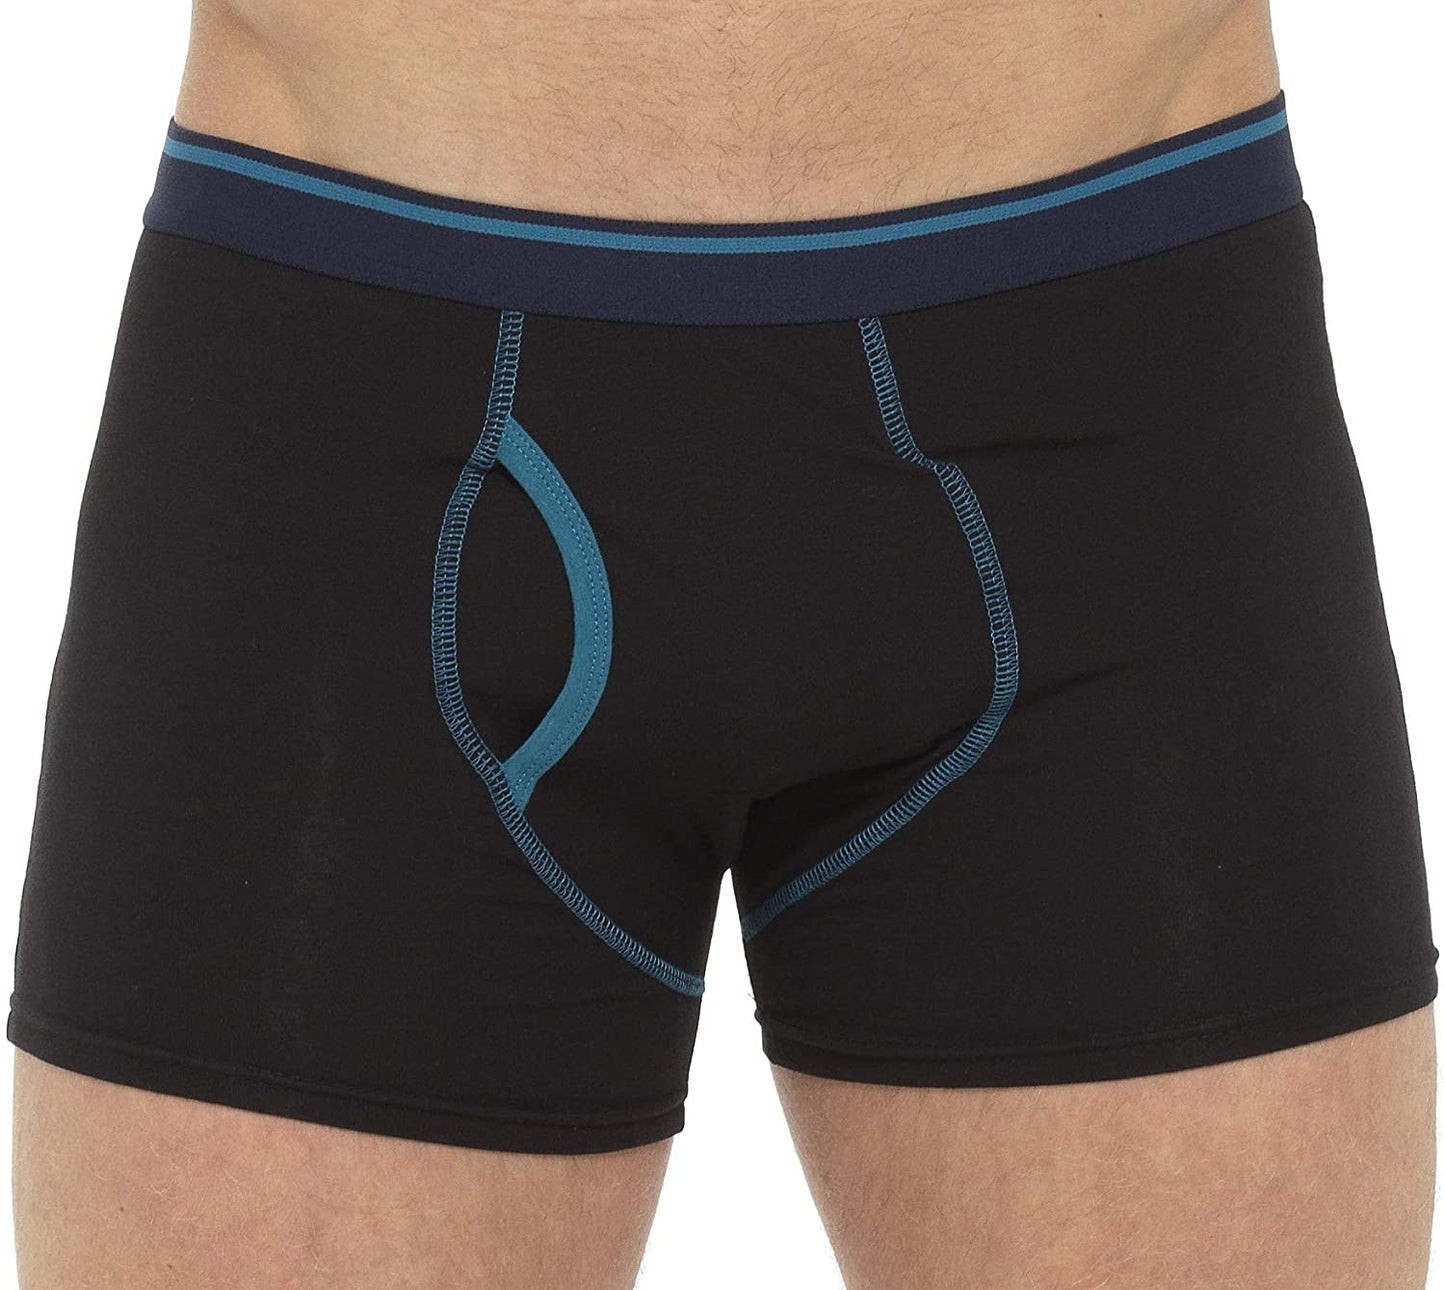 6 Pack Men's Cotton Rich Trunks with Keyhole